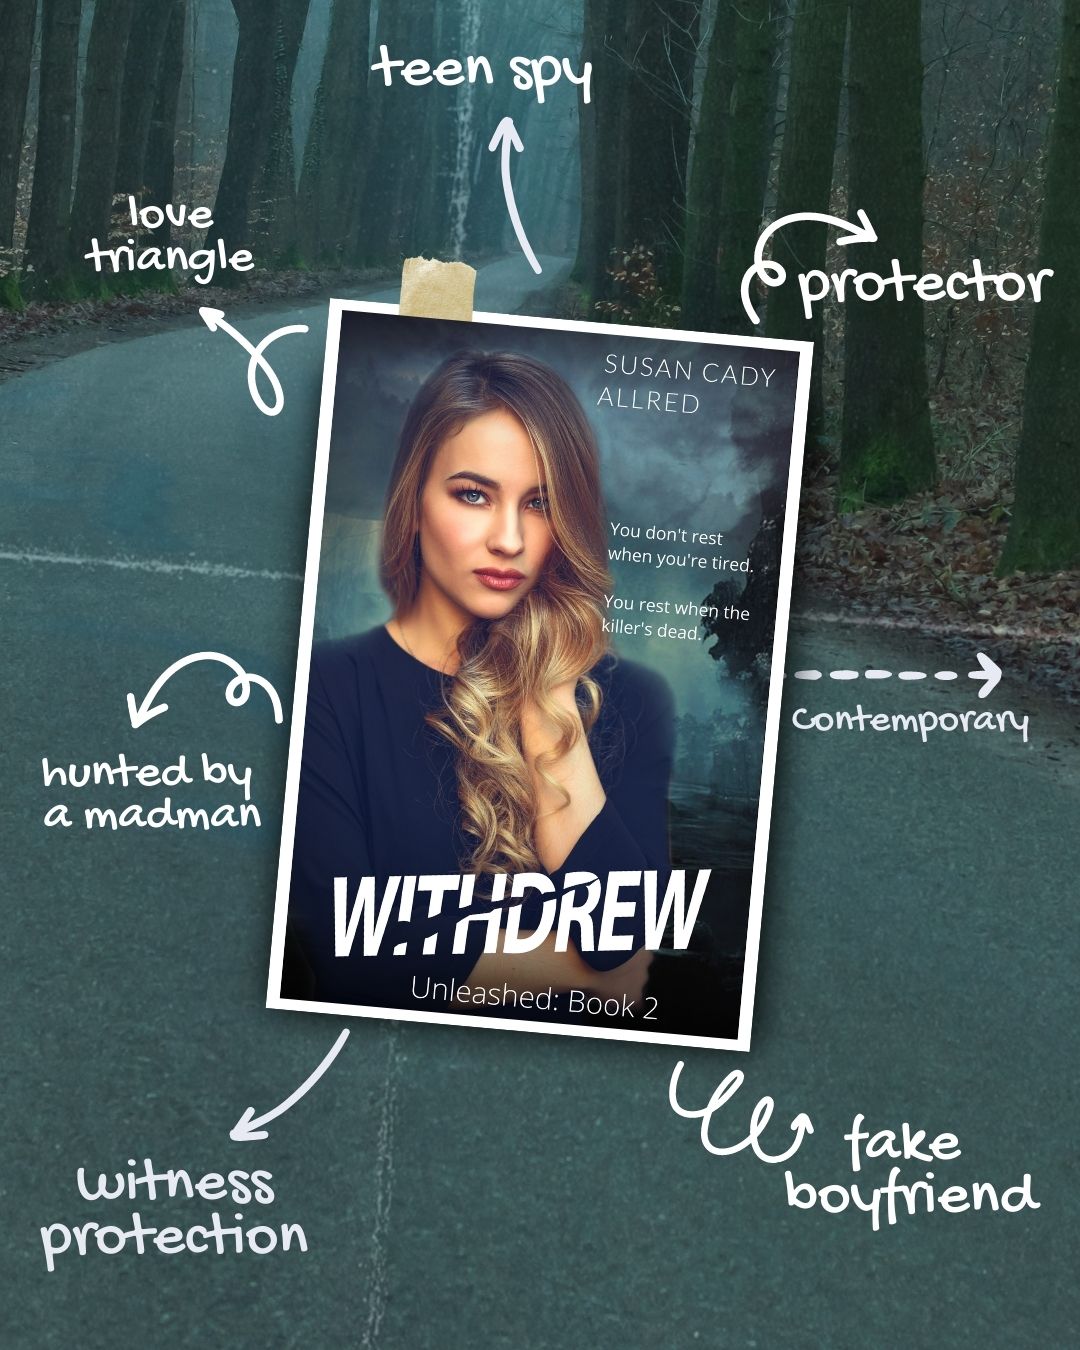 WithDrew: A YA Thriller (Unleashed Book 2) Audiobook